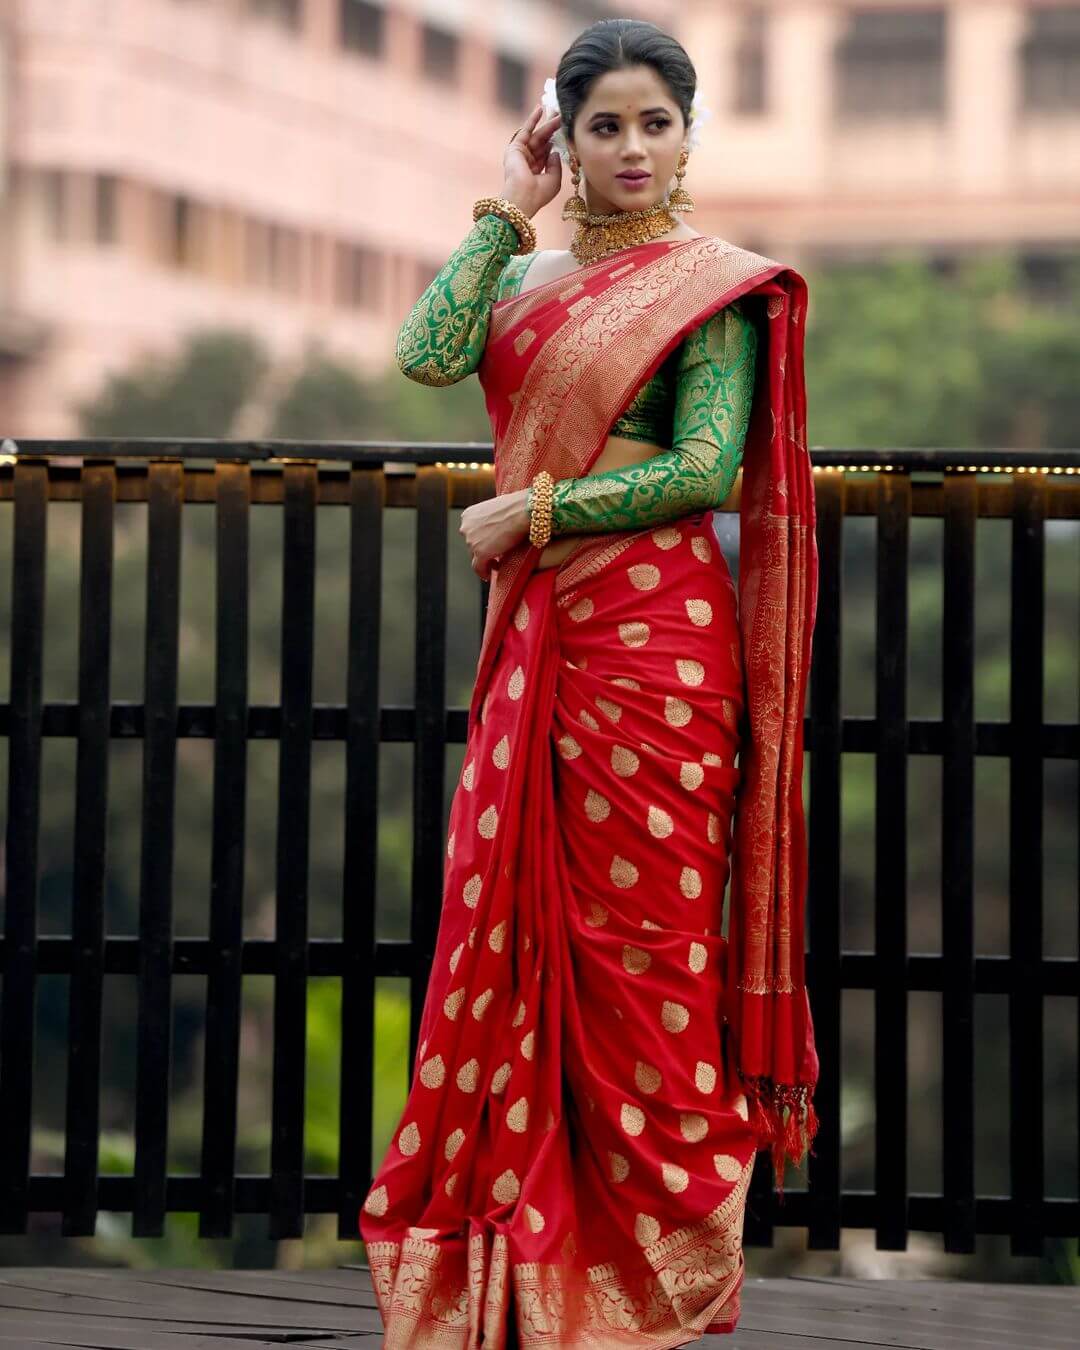 Diva Amrita Halder In Traditional Red Silk Saree With Green Full Sleeves Blouse & Heavy Gold Jewellery Looks Royal